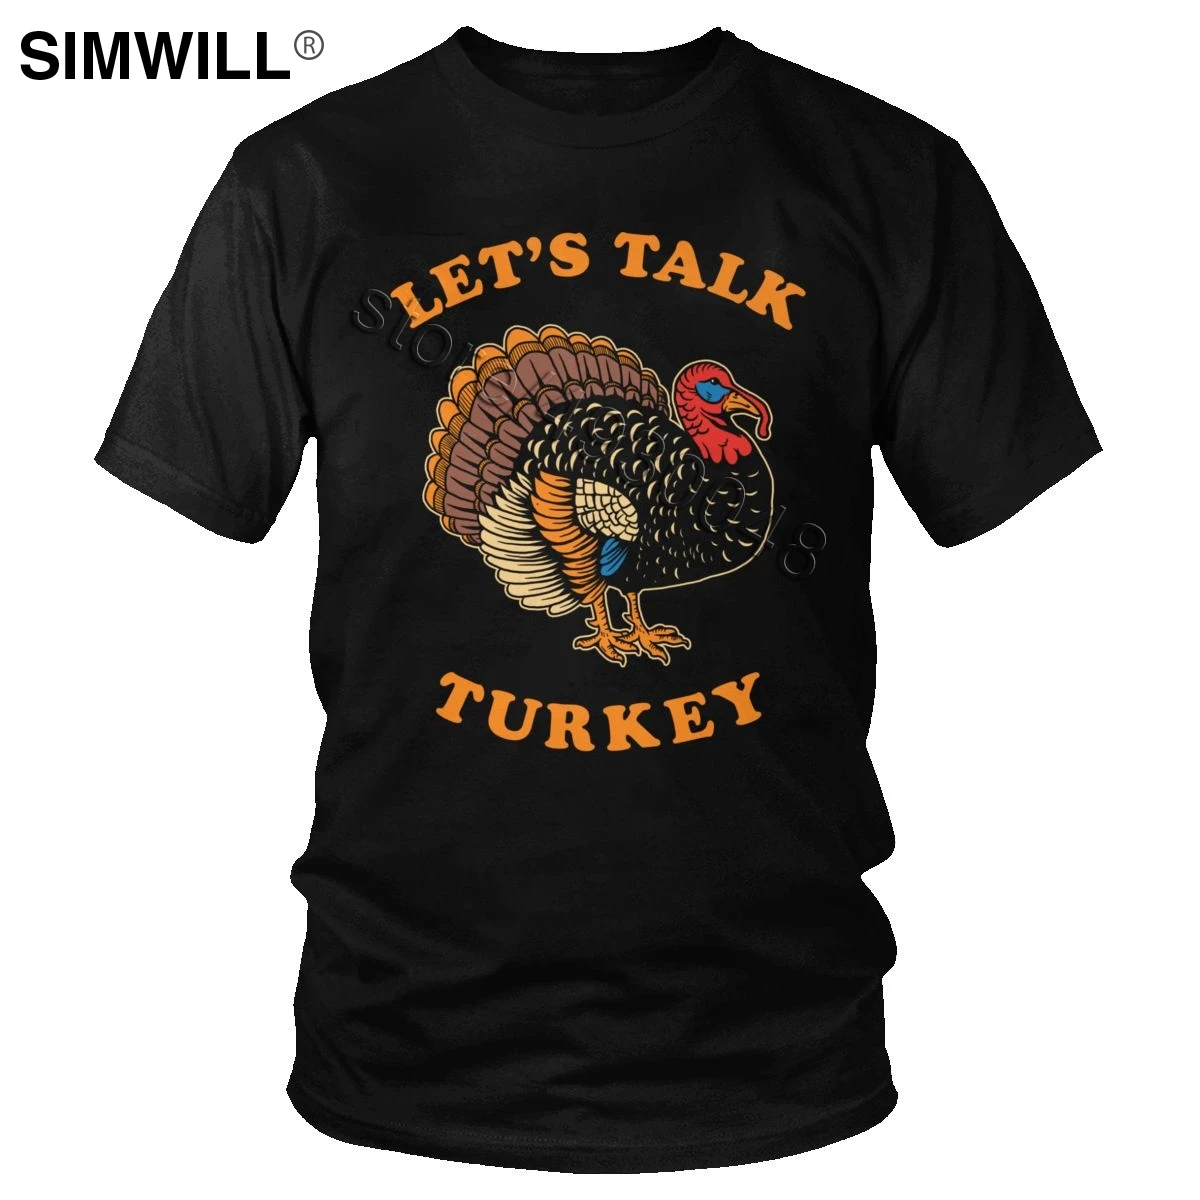 

Male Funny Let's Talk Turkey Shirt Personality Thanksgiving Day T-Shirt Short Sleeved Pure Cotton Print Tshirt Trend Apparel Tee